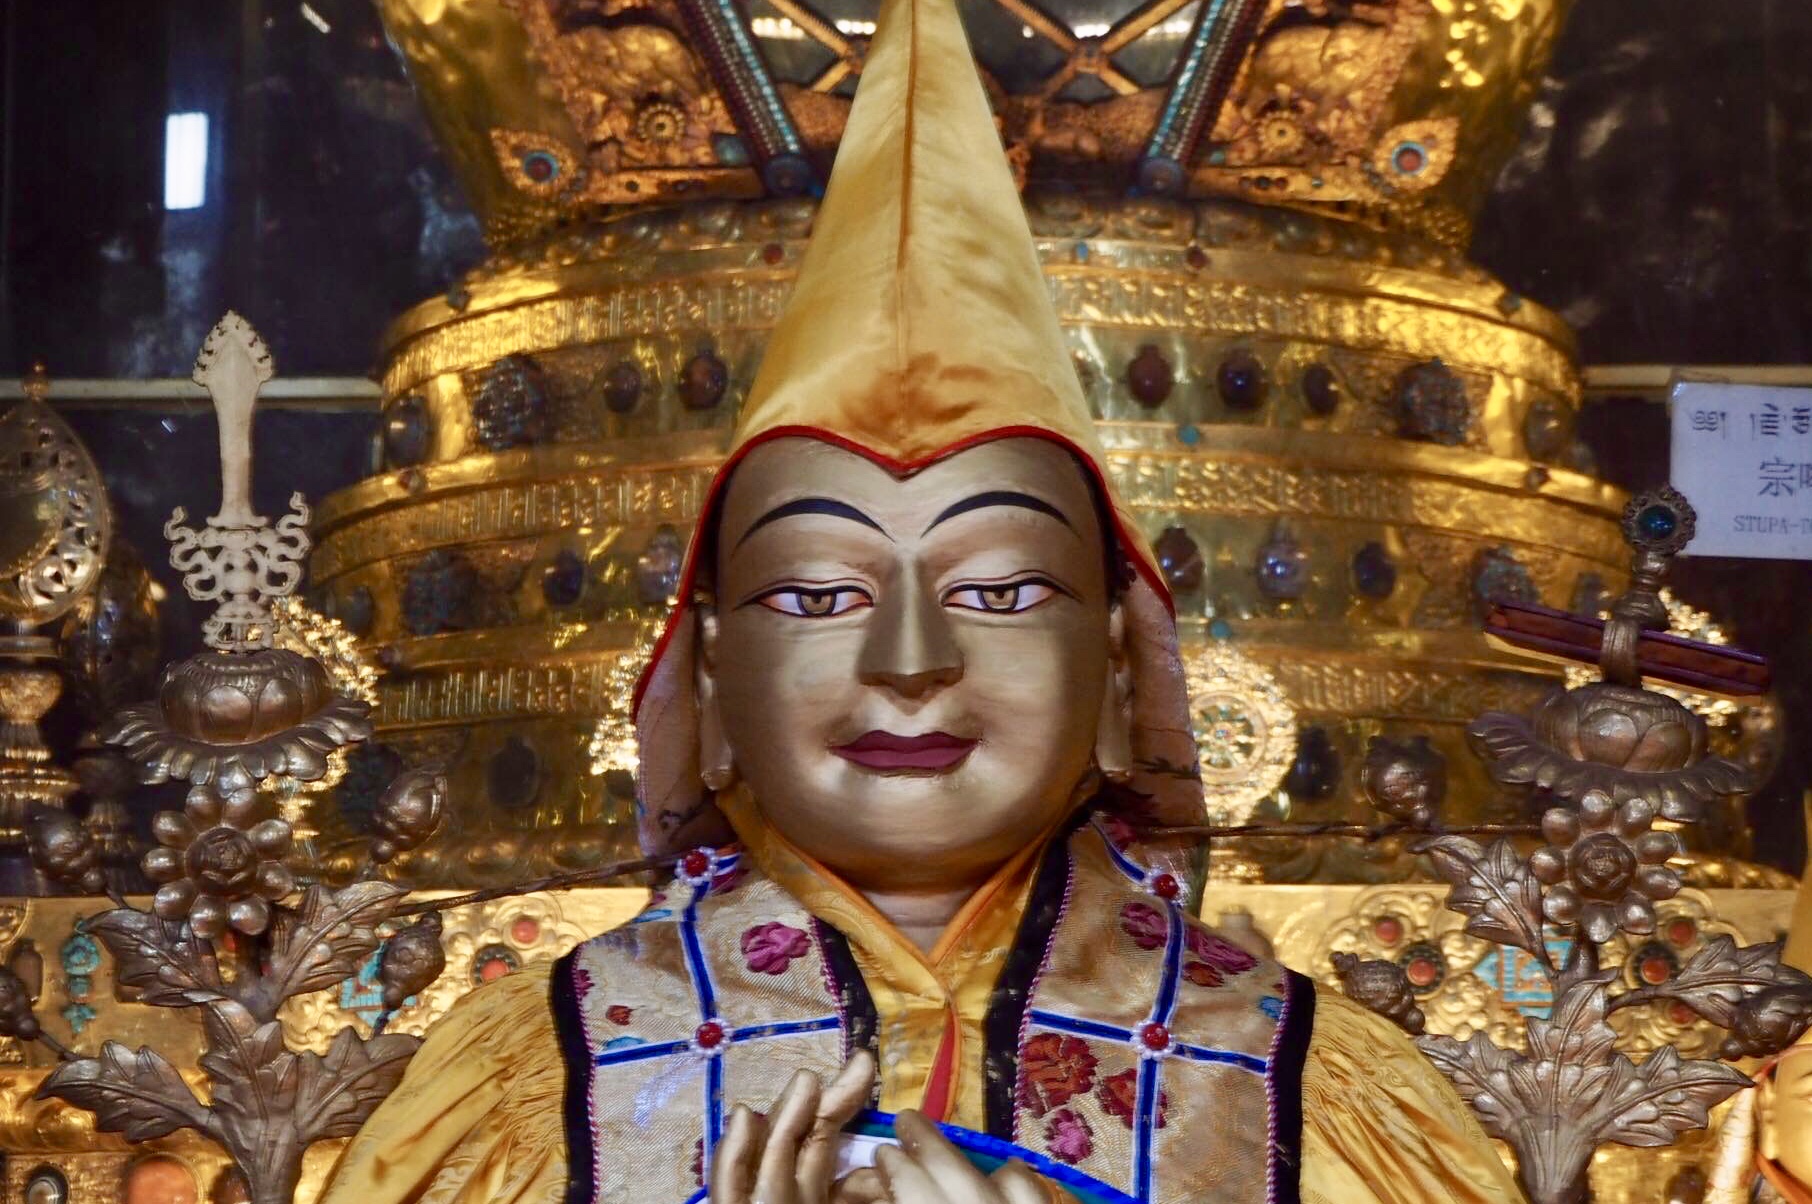 Statue of Lama Tsongkhapa at Ganden Monastery, Tibet, in front of the stupa containing his relics. (Photo Ven Tenzin Tsultrim)